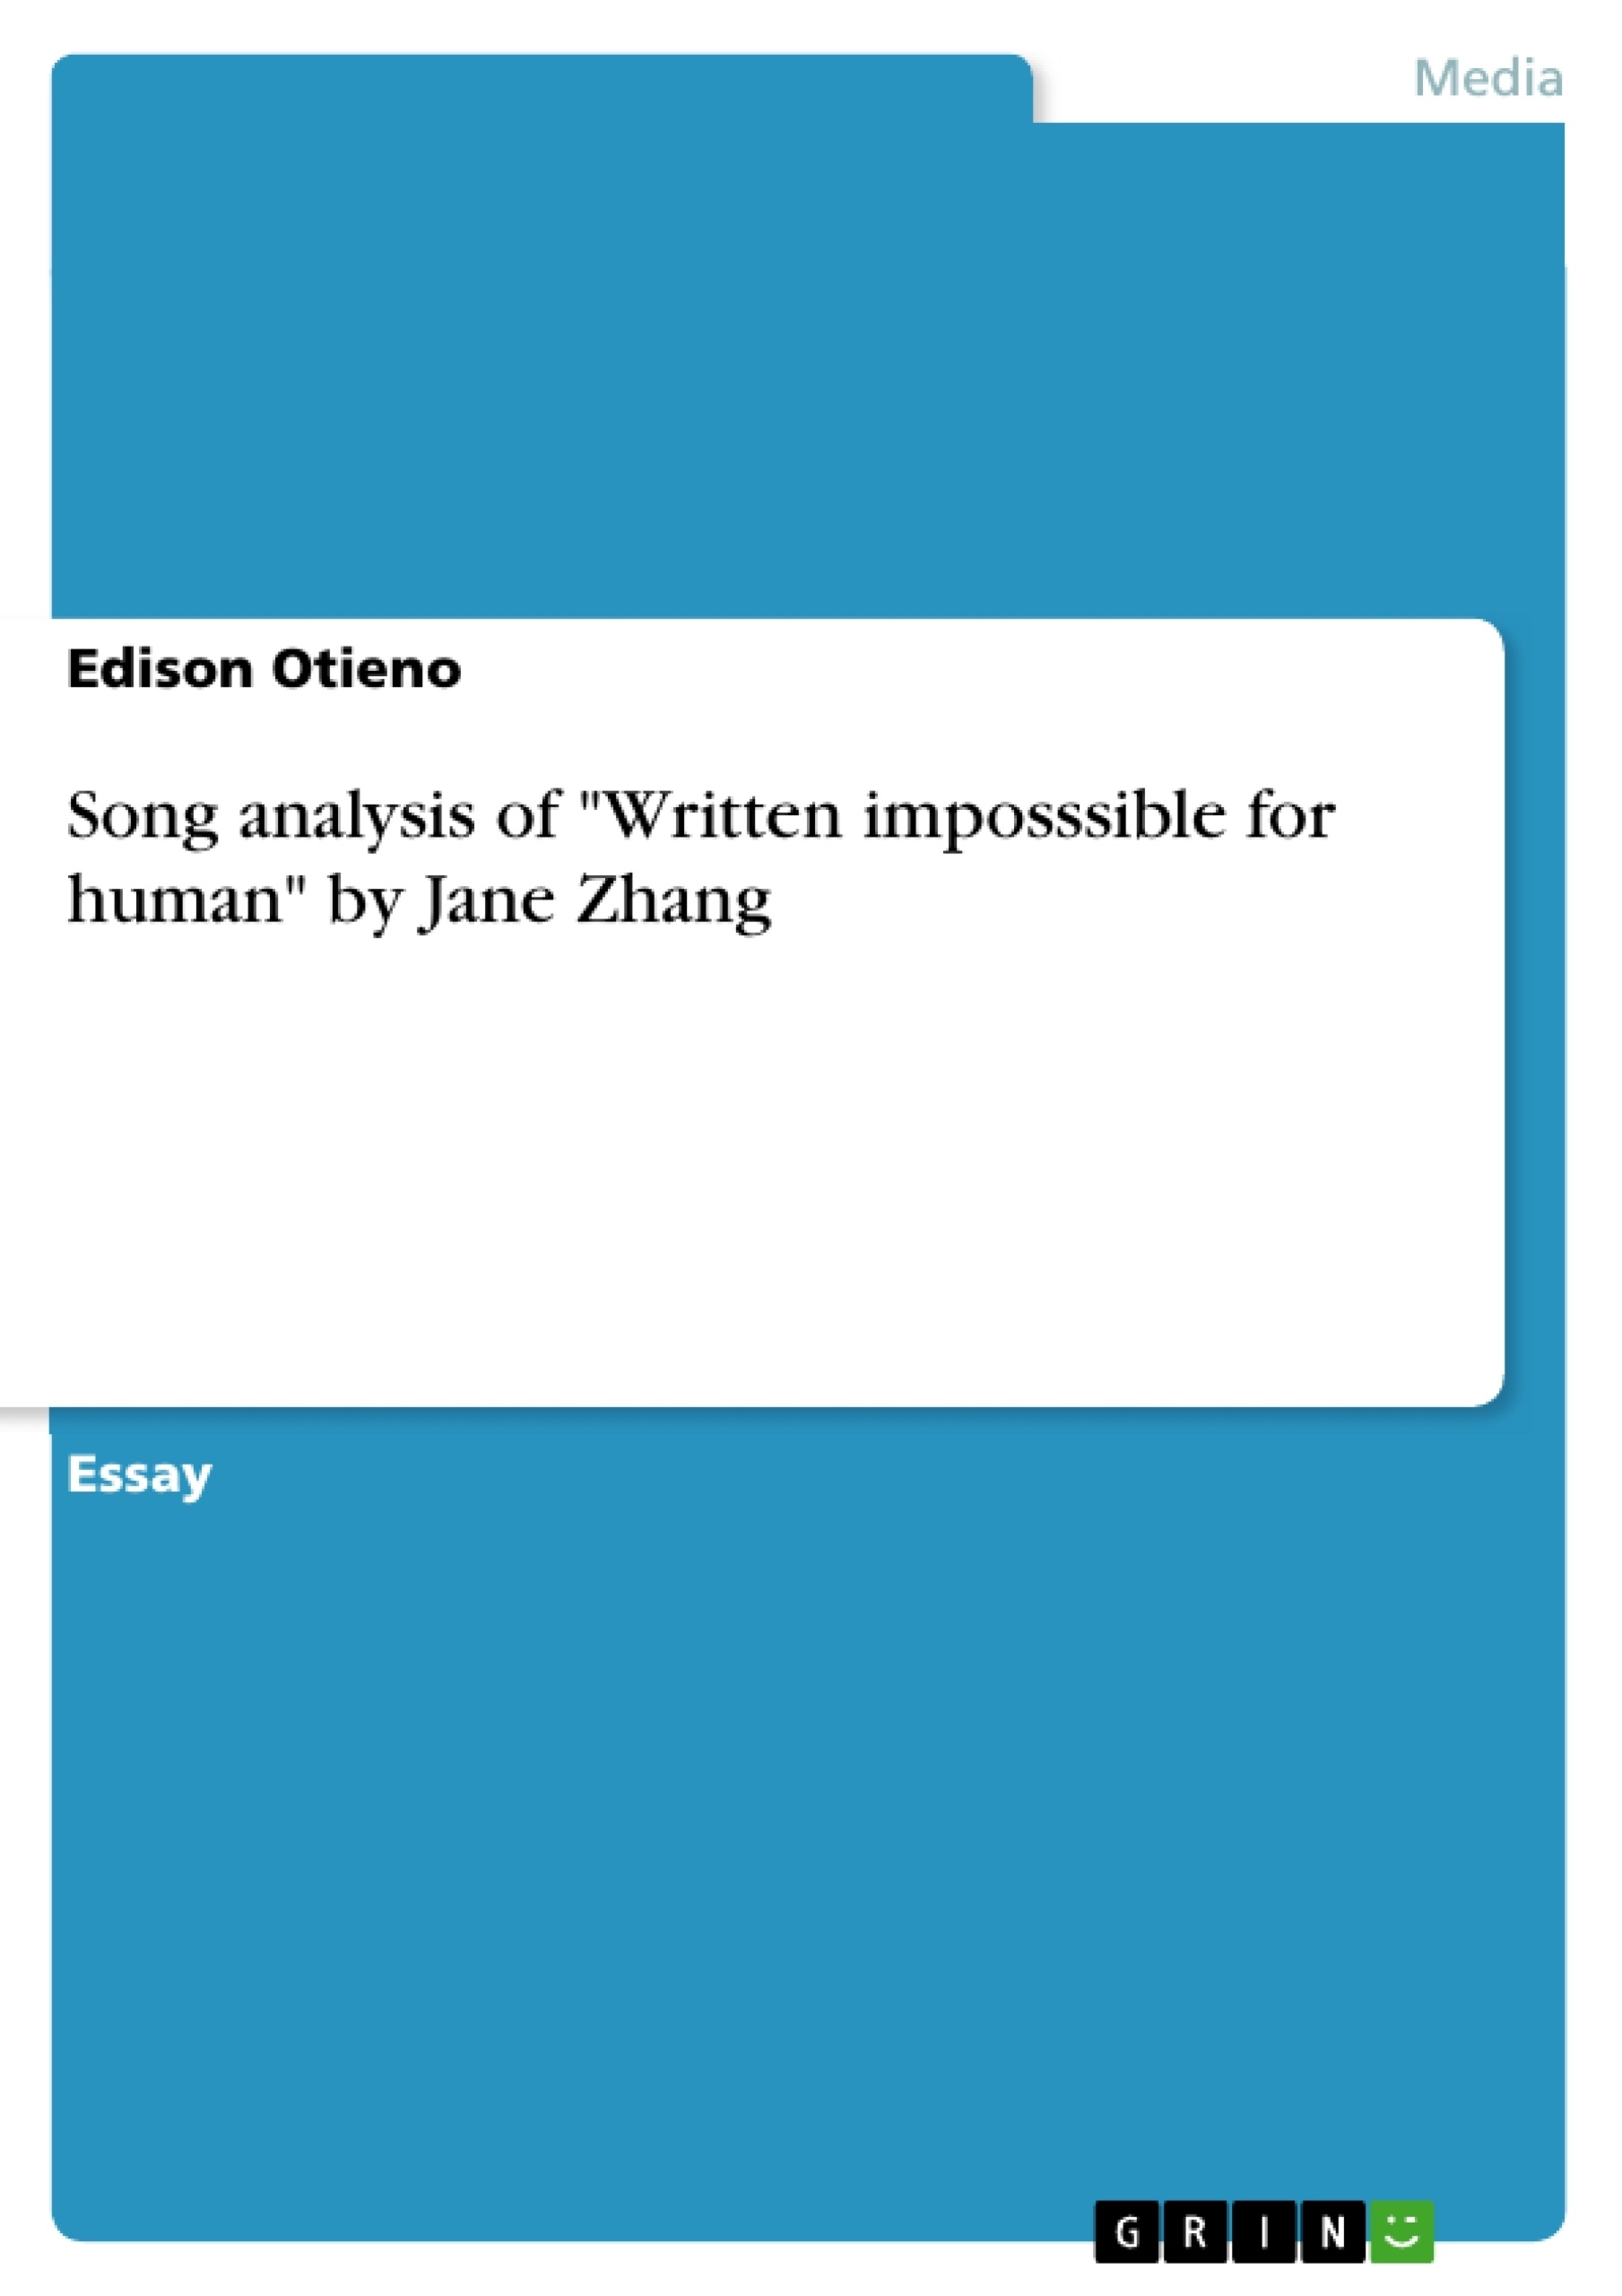 Title: Song analysis of "Written imposssible for human" by Jane Zhang